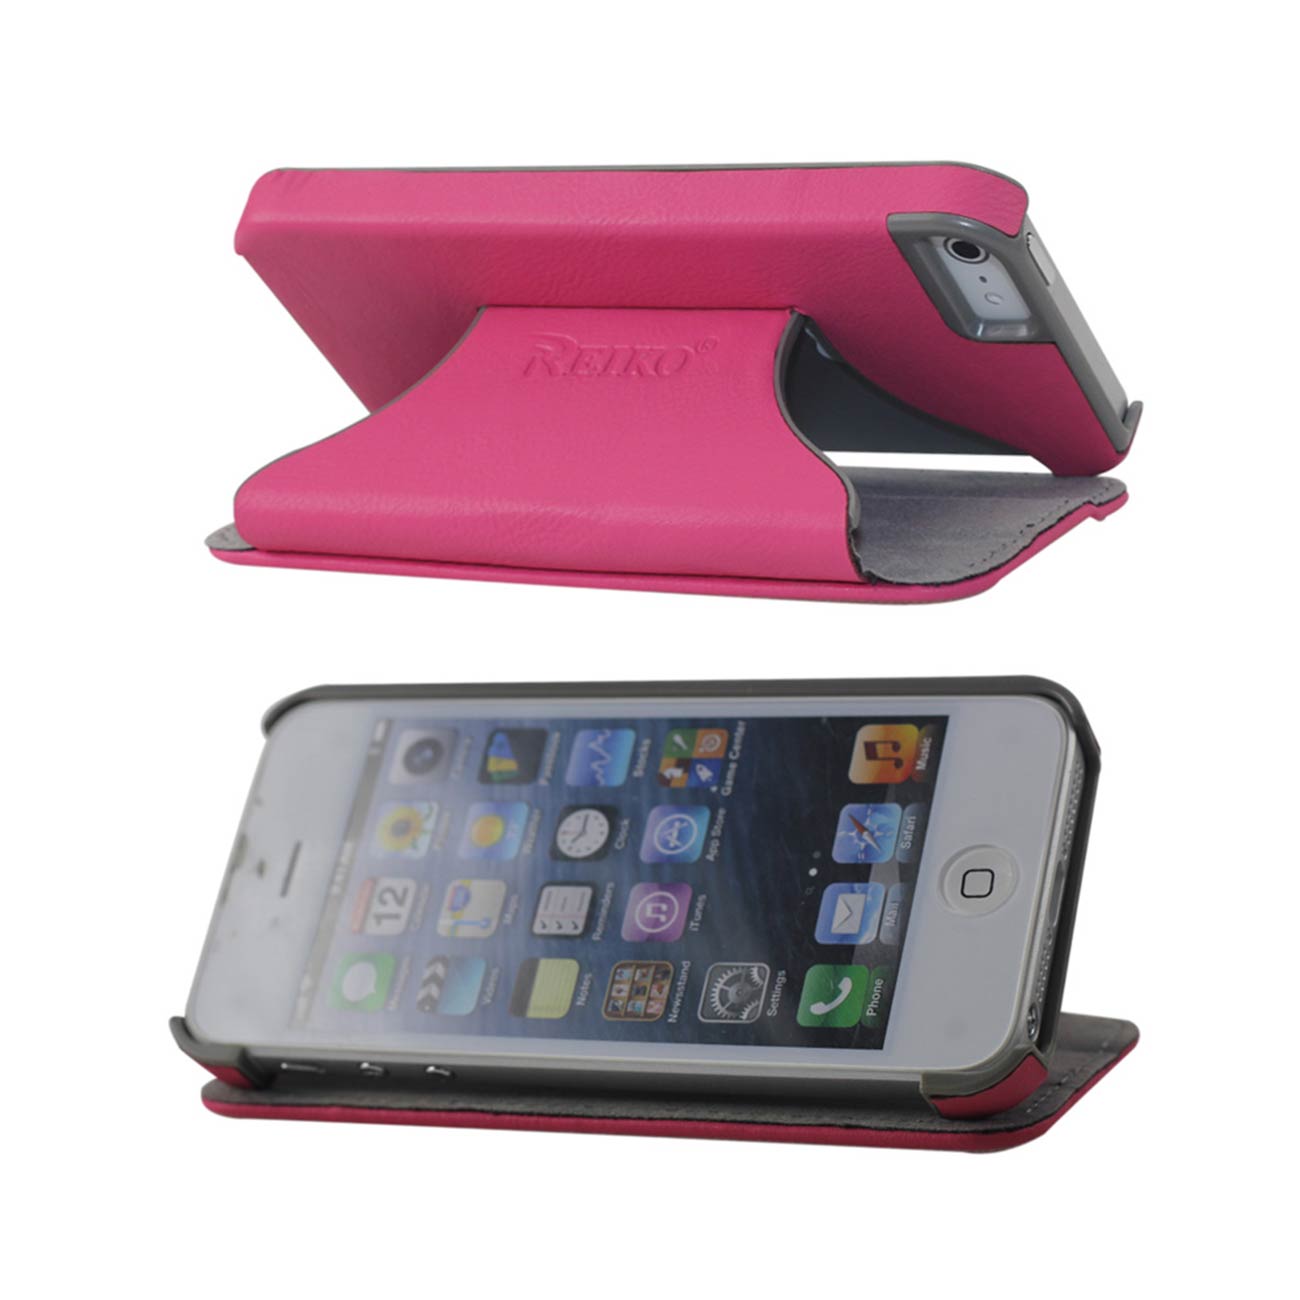 Reiko iPhone Se/ 5S/ 5 Flip Folio Case With Stand In Hot Pink